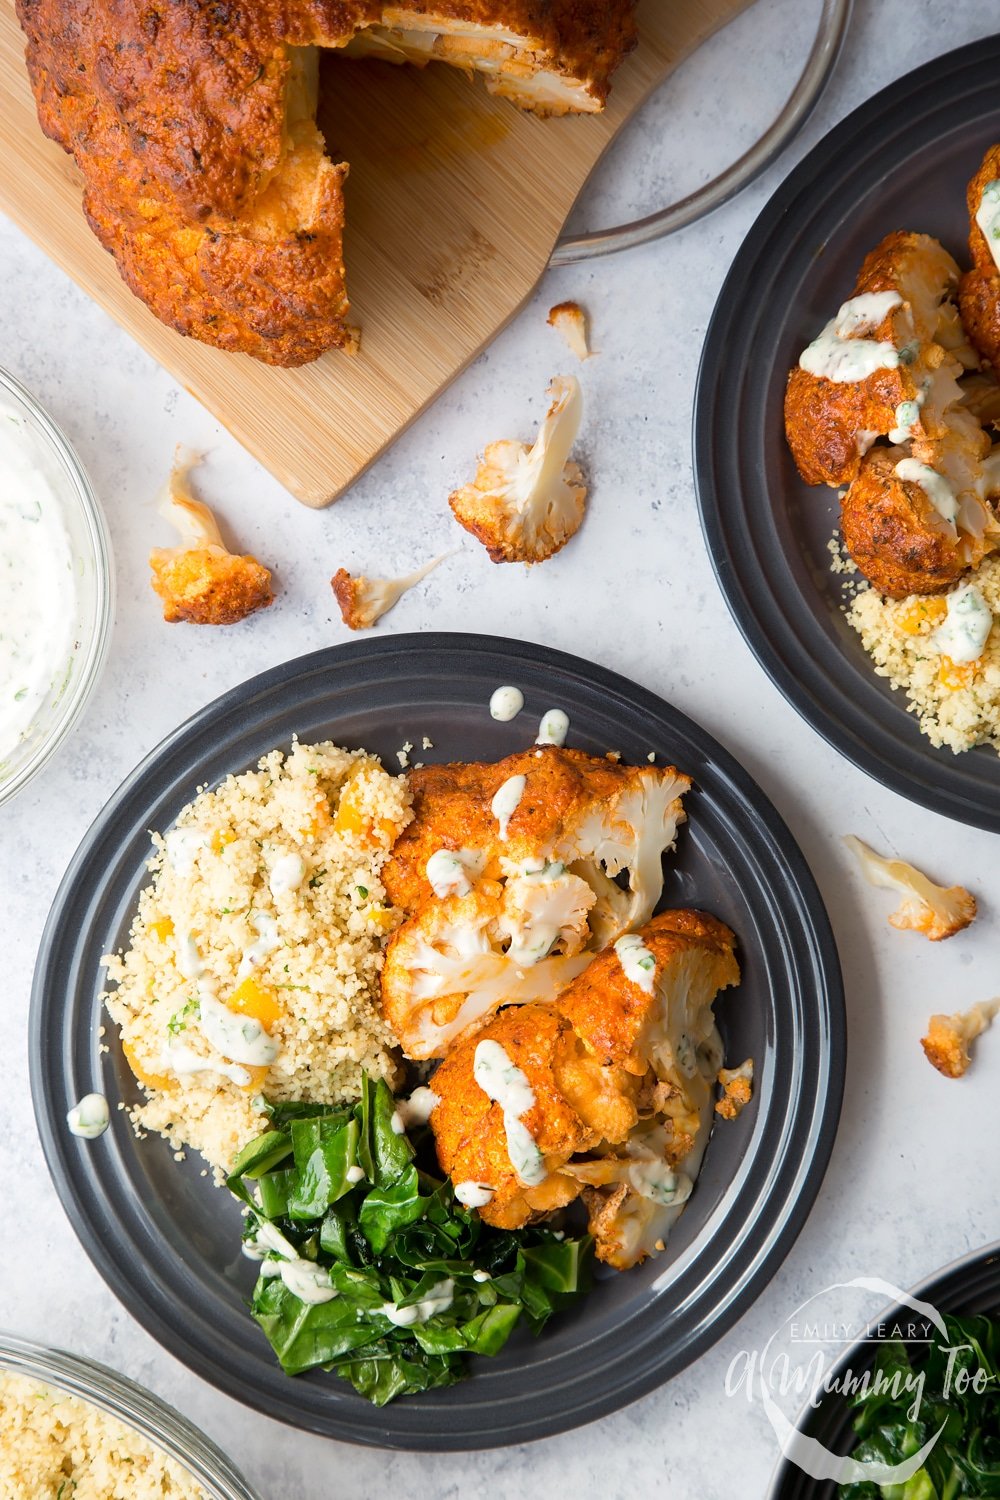 Harissa roasted cauliflower served with wilted spring greens and herby couscous, drizzled with lemon tahini sauce